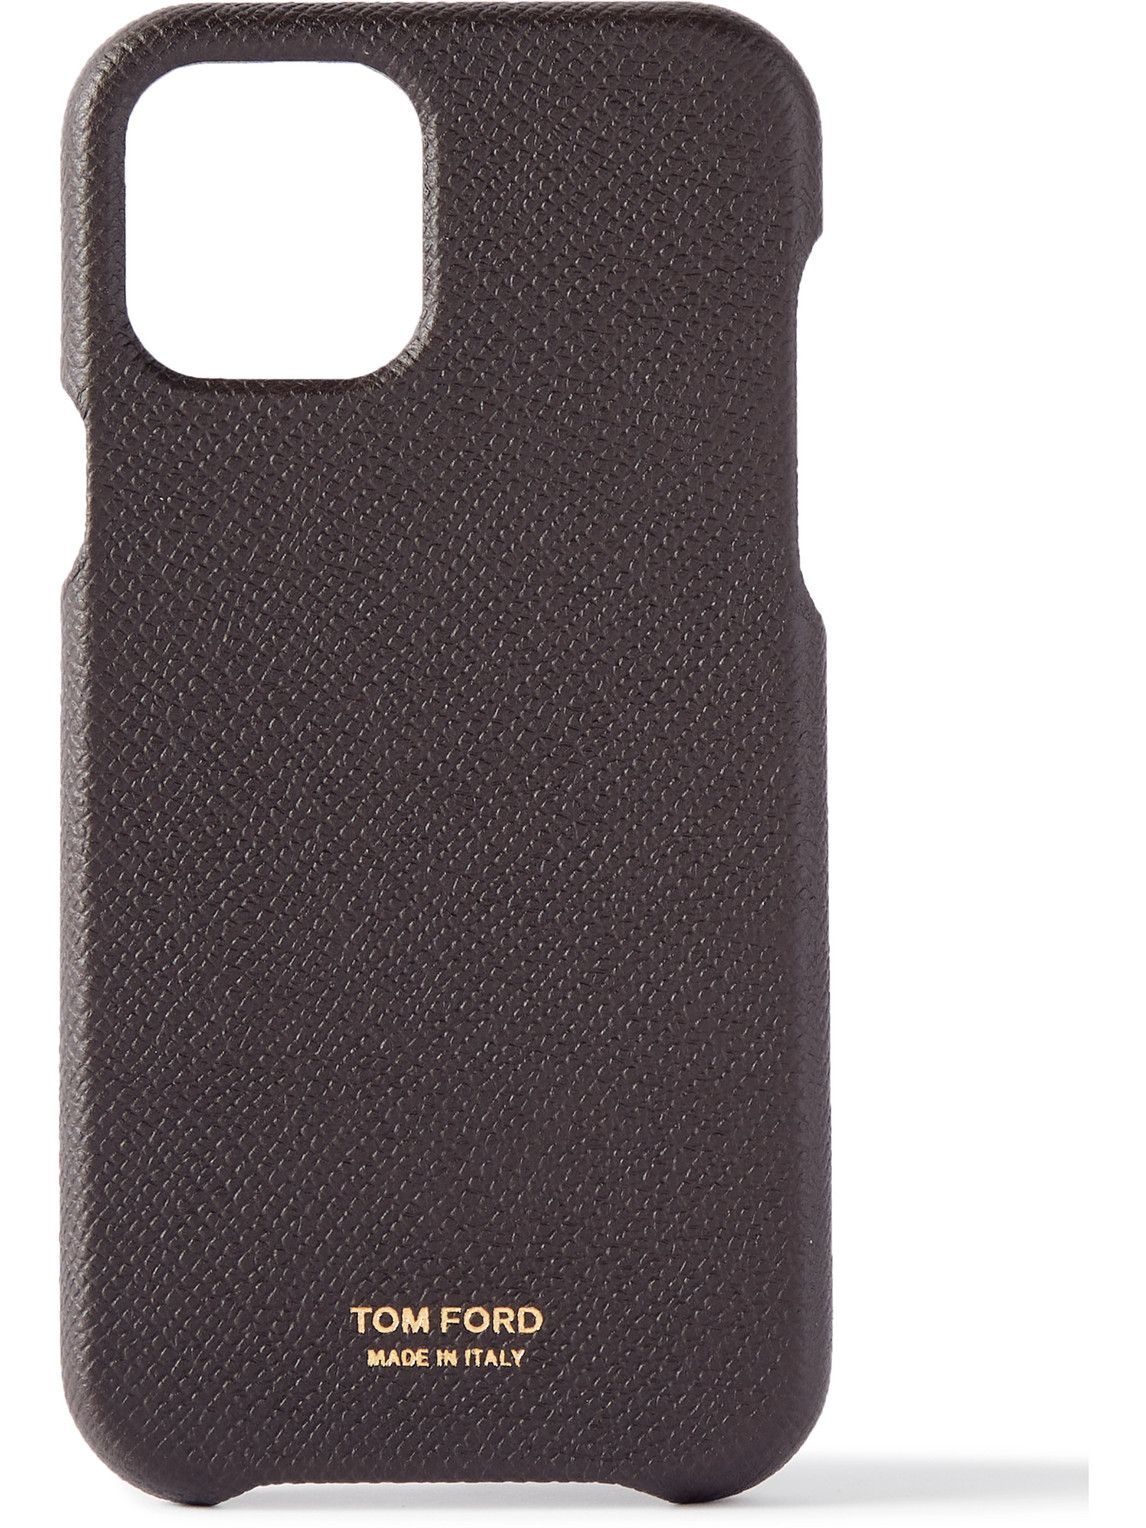 TOM FORD - Full-Grain Leather iPhone 12 Pro Case TOM FORD